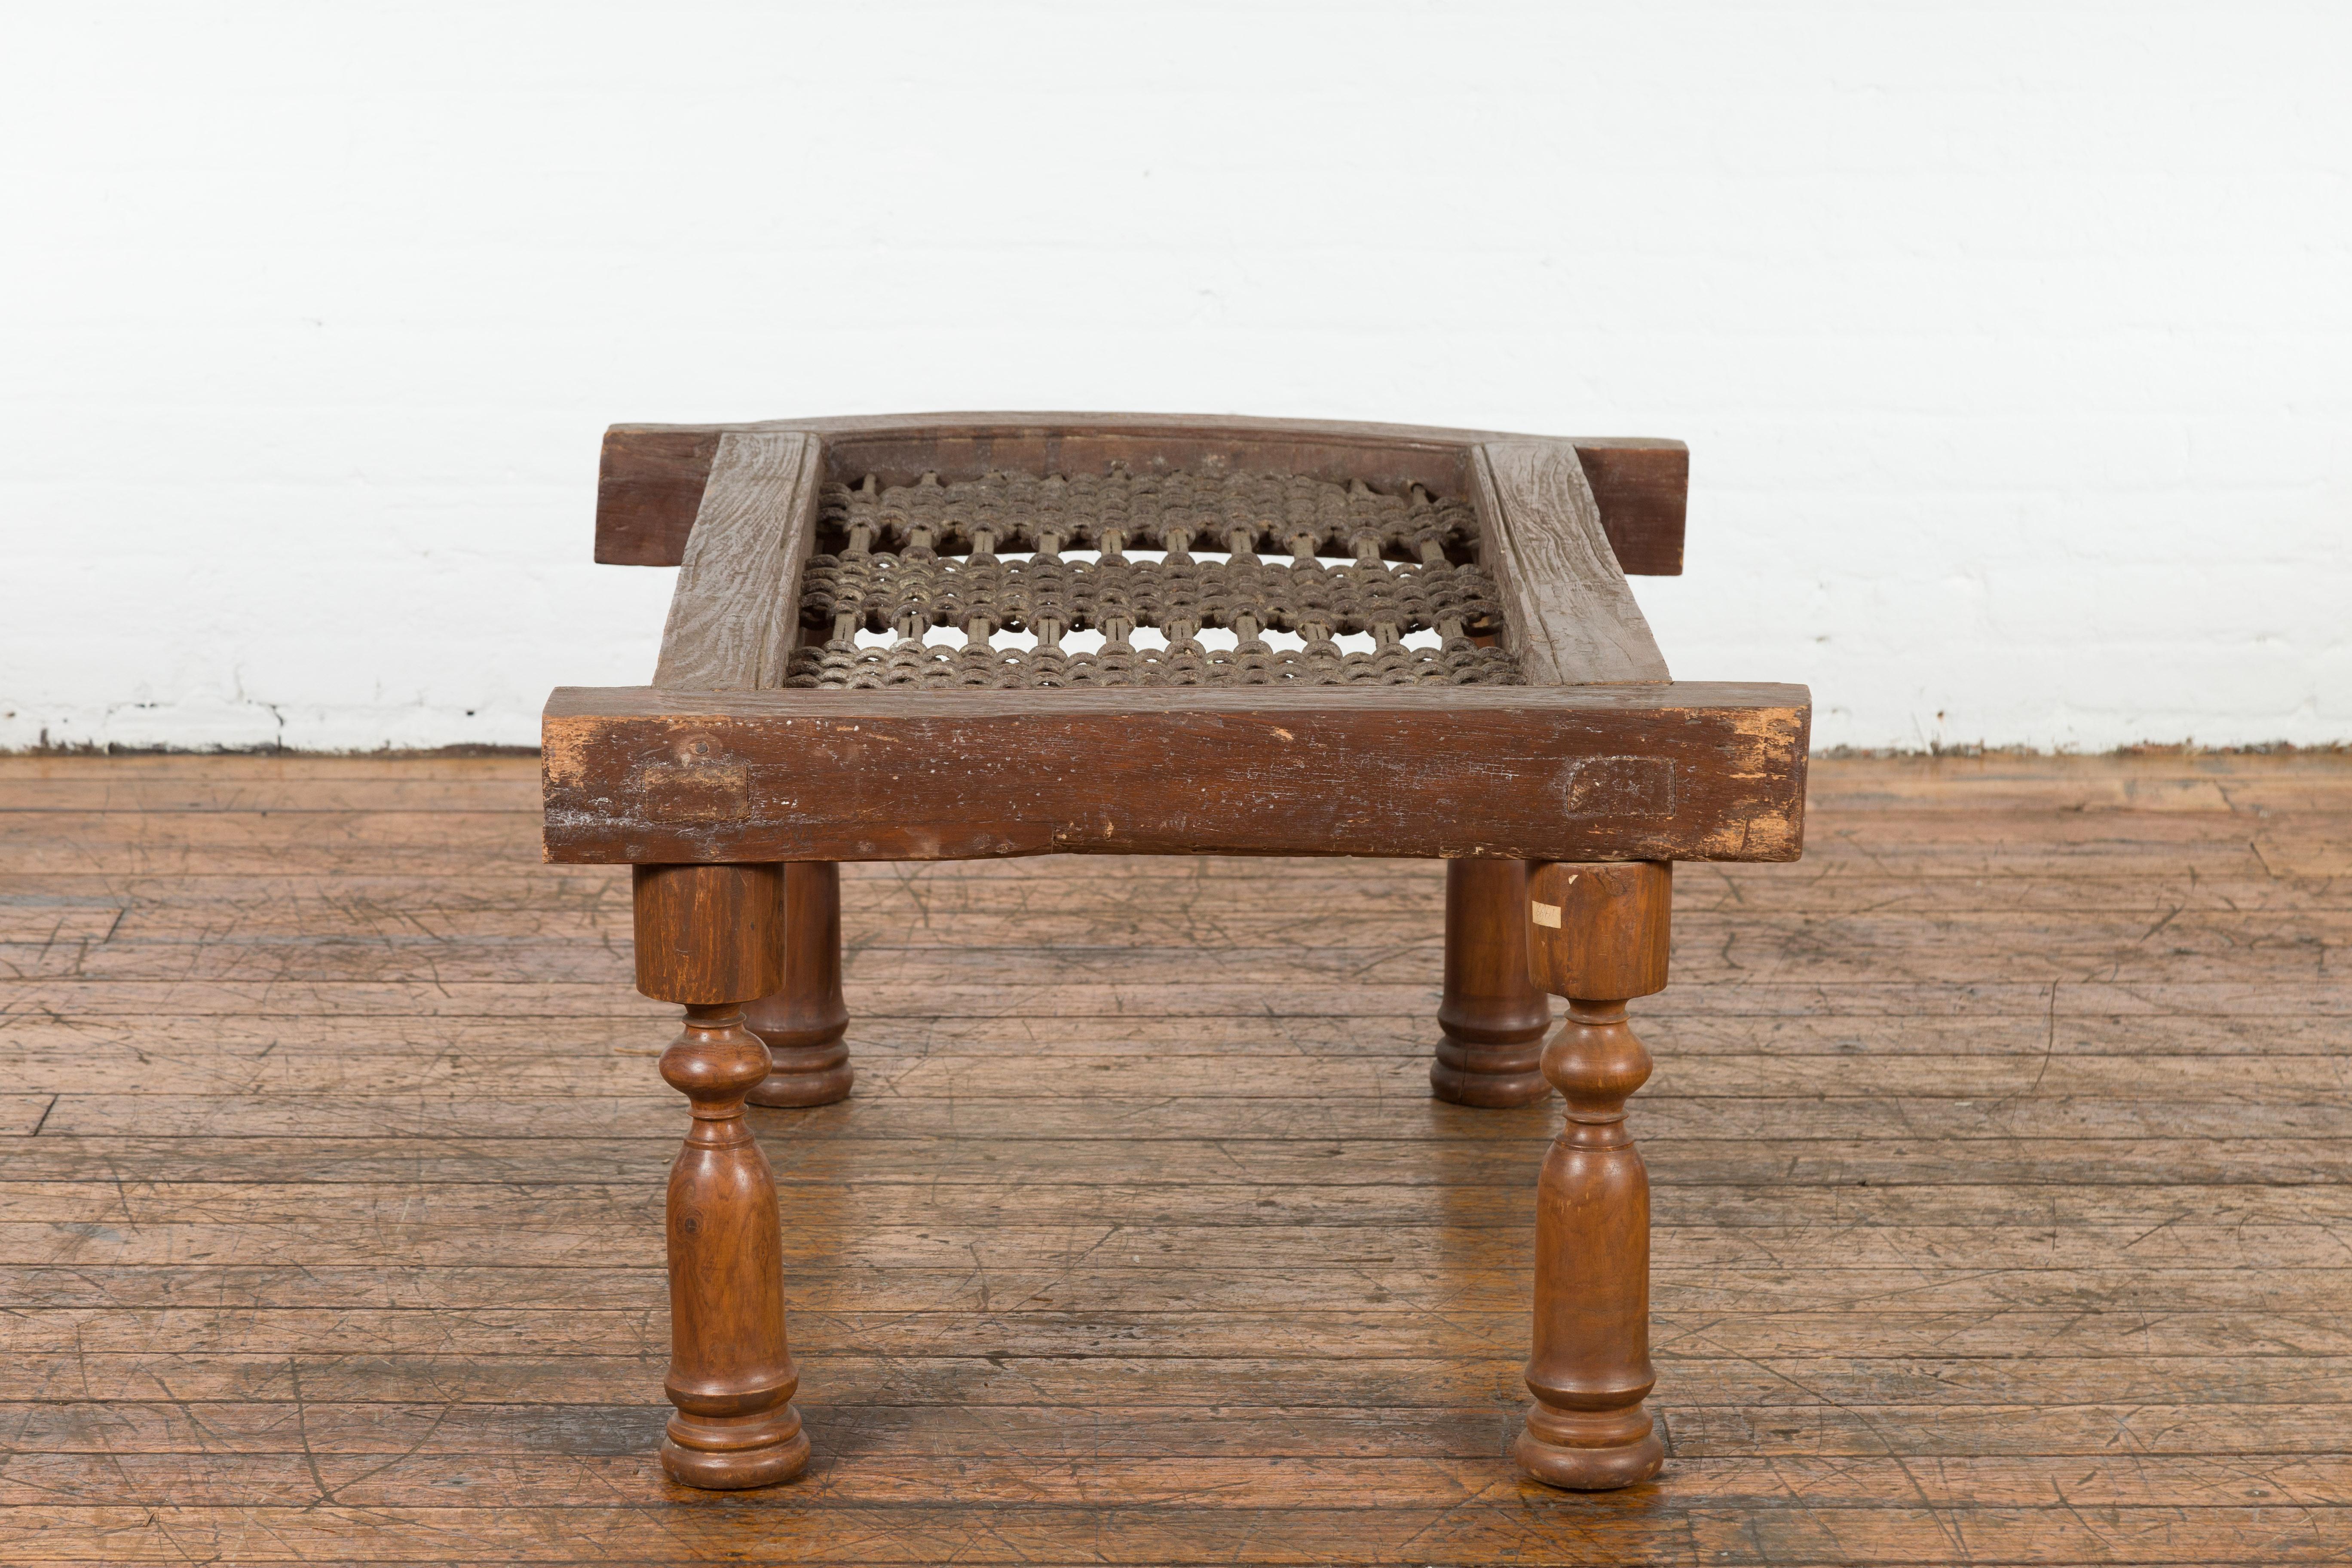 Rustic 19th Century Indian Iron Window Grate Made Into a Coffee Table In Good Condition For Sale In Yonkers, NY